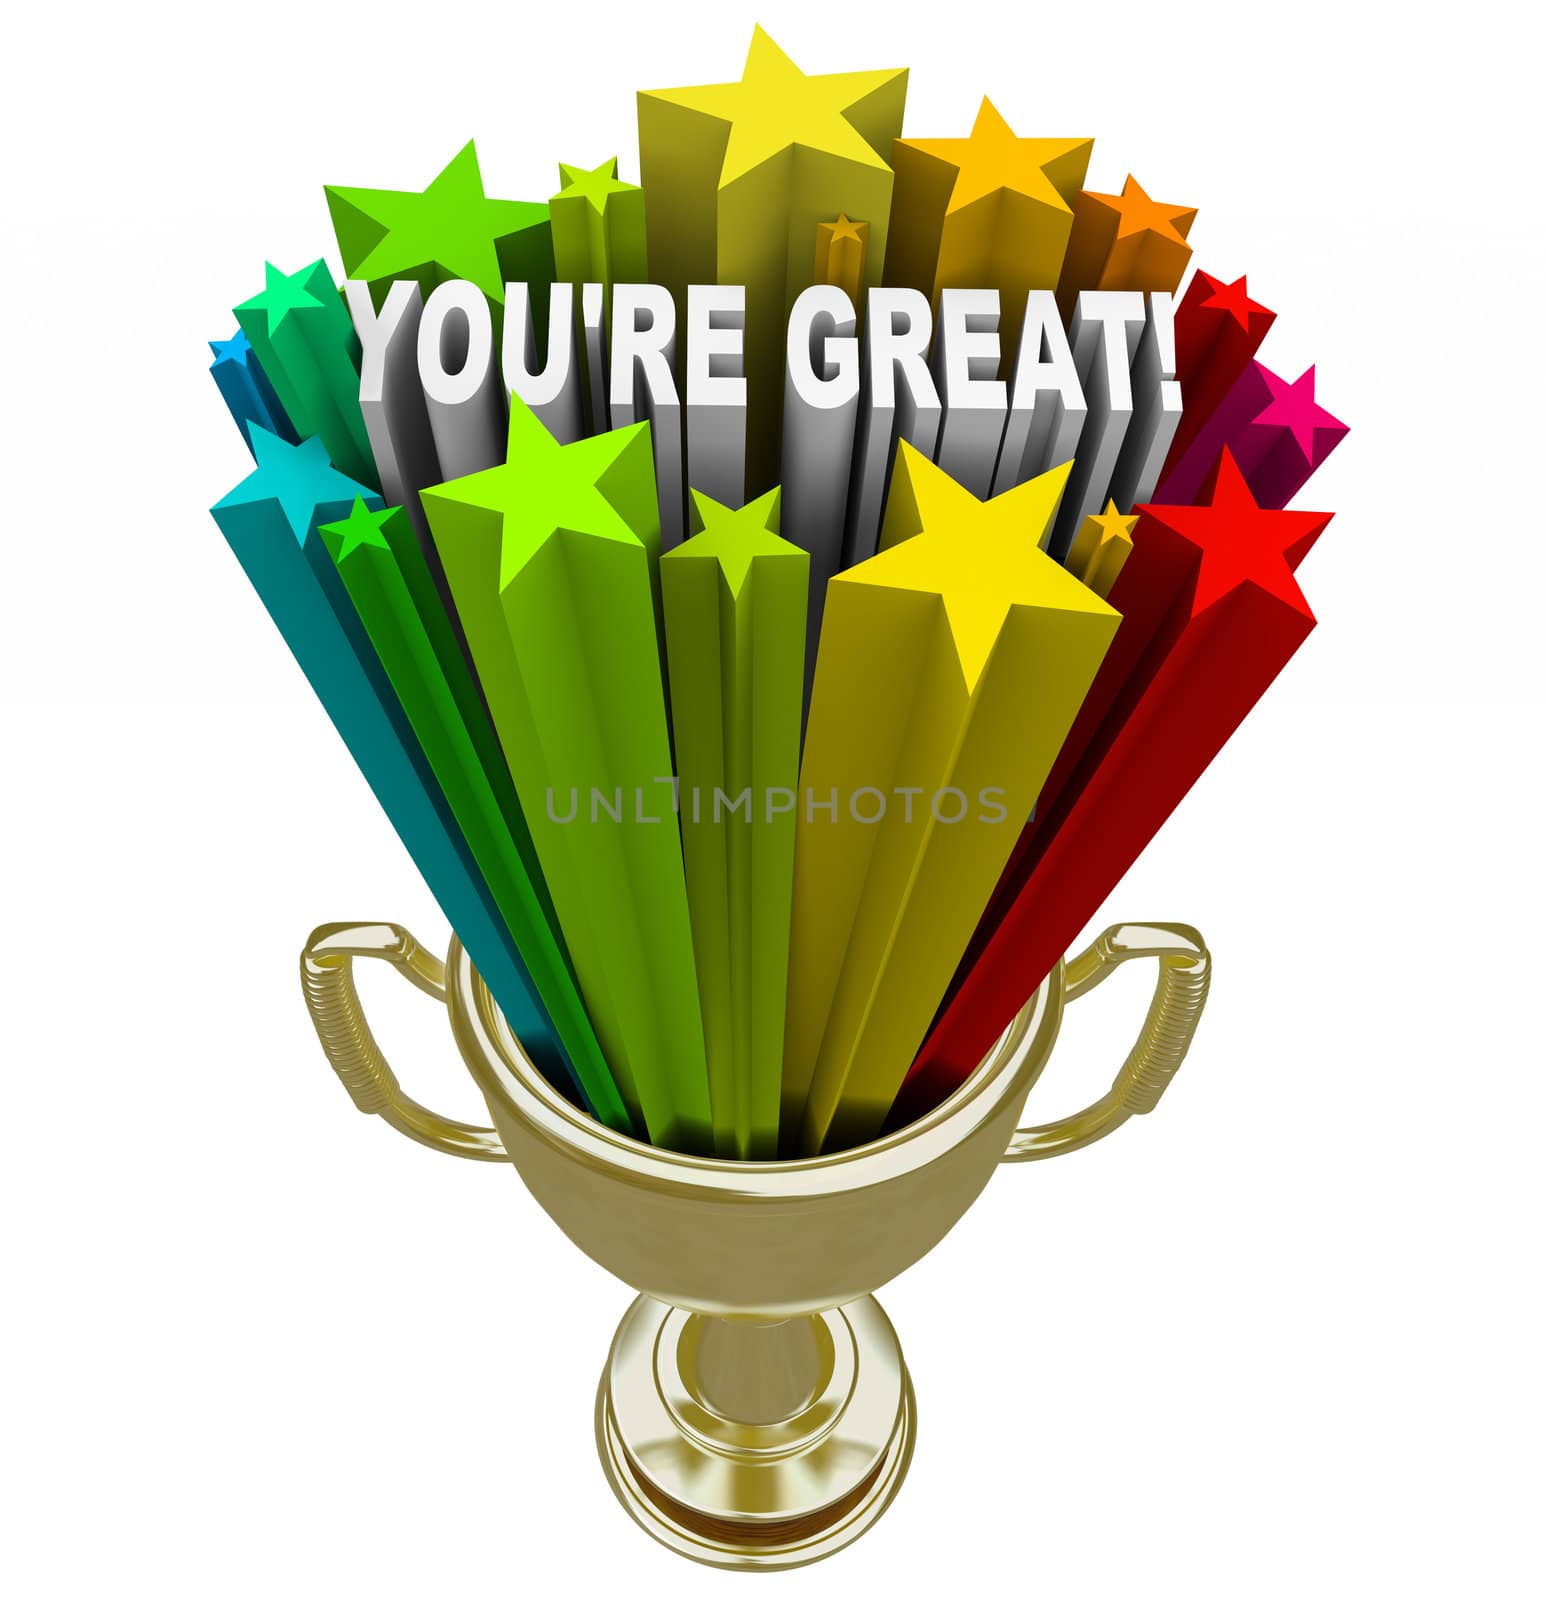 A golden trophy with the words You're Great, symbolizing praise, recognition or commendation for a job well done